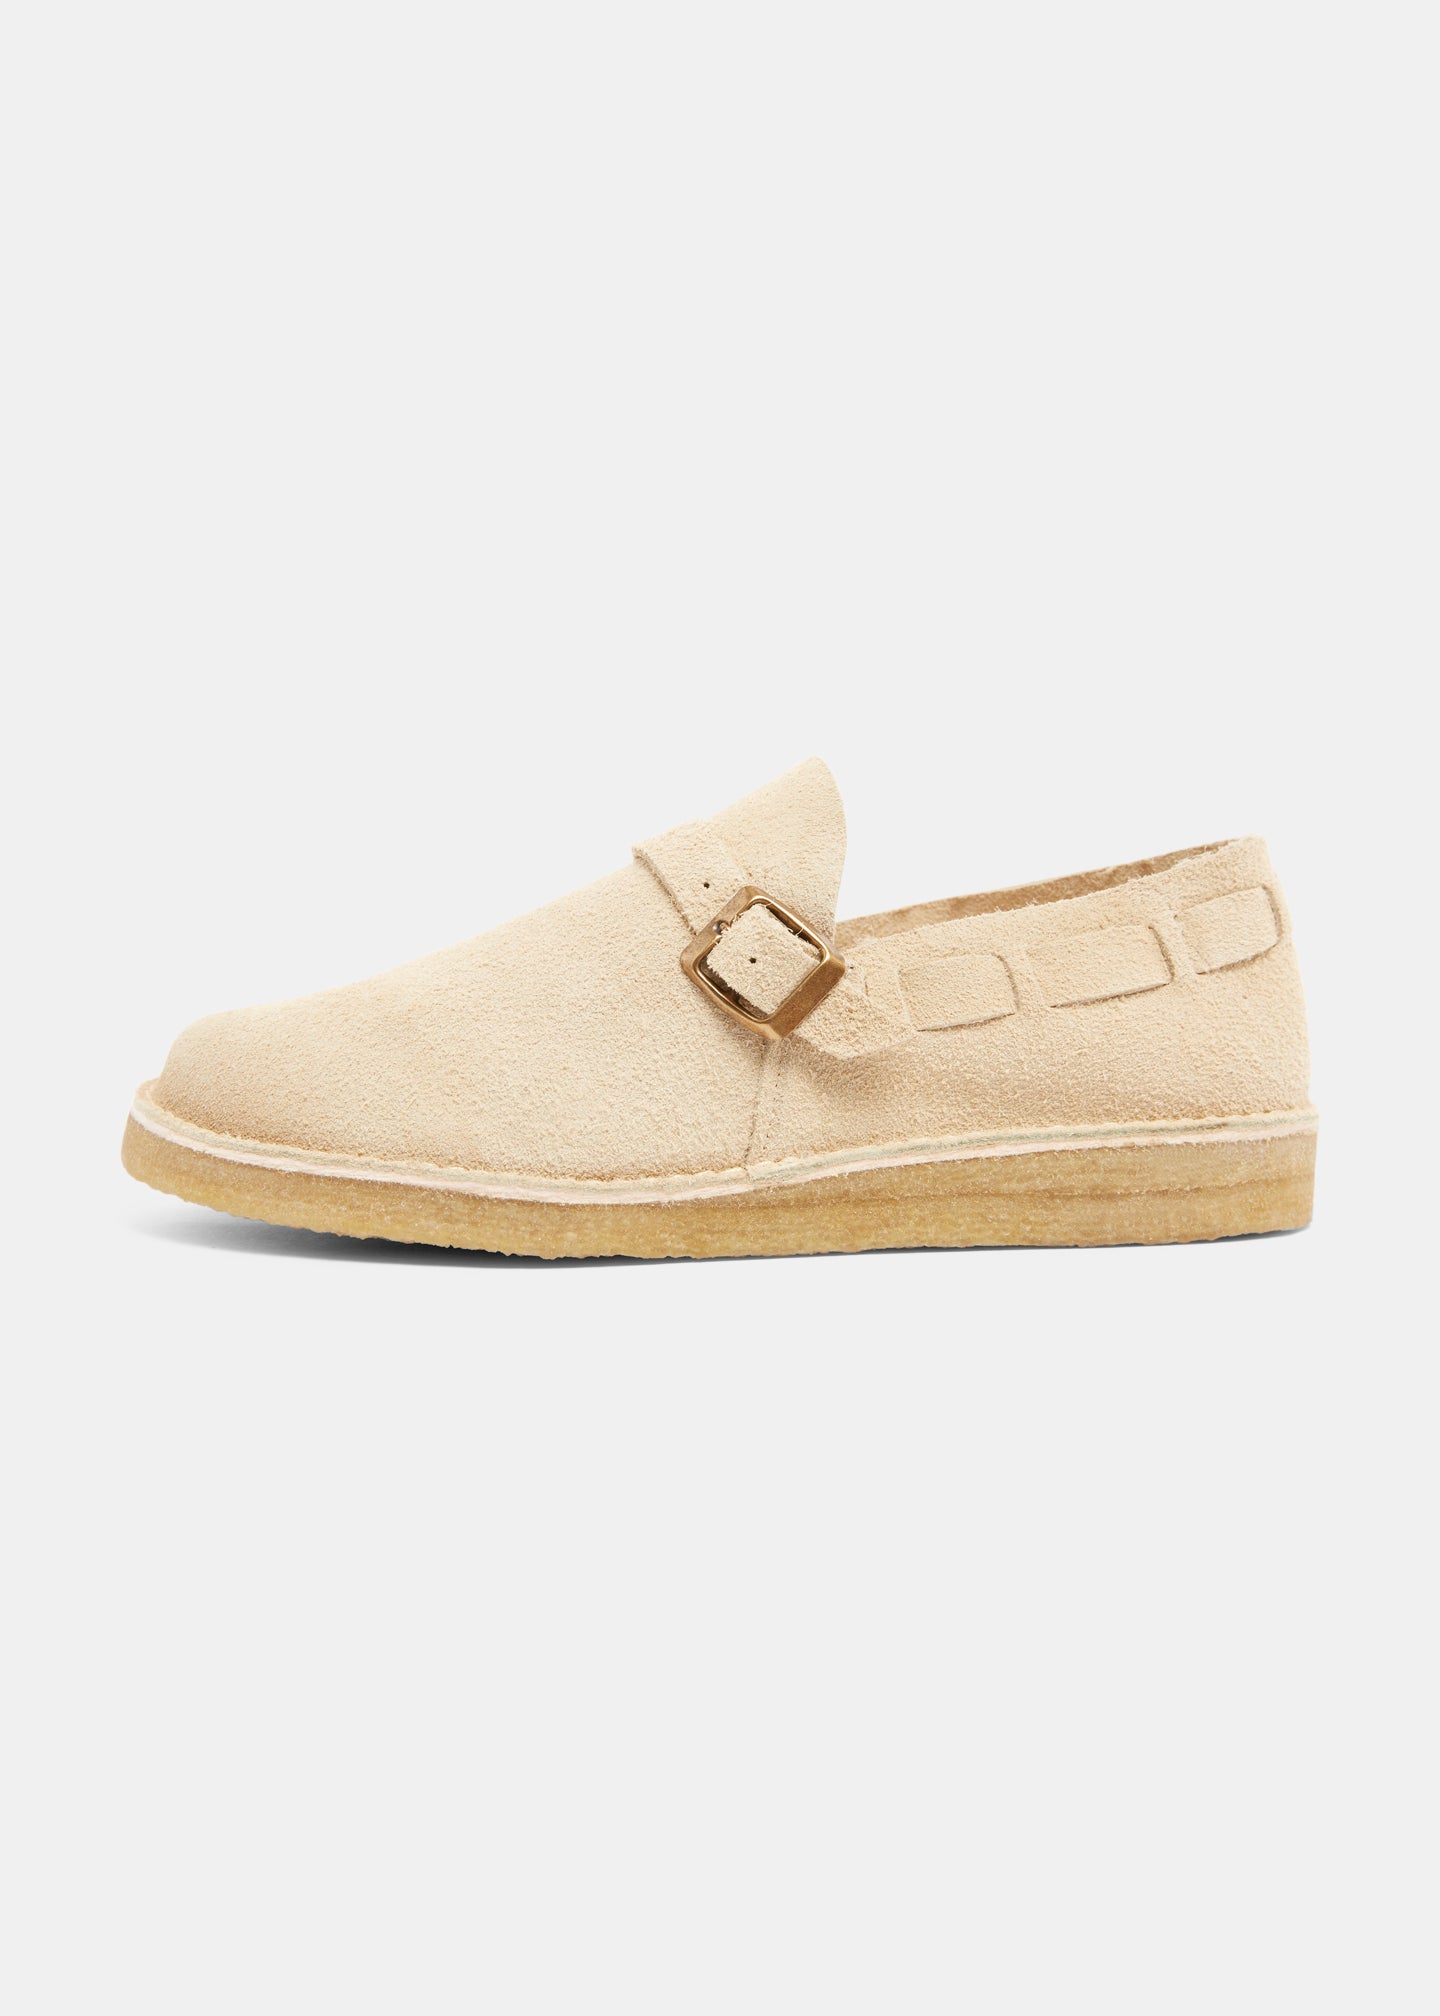 Corso Suede Buckle Monk Shoe On Crepe - Hairy Sand